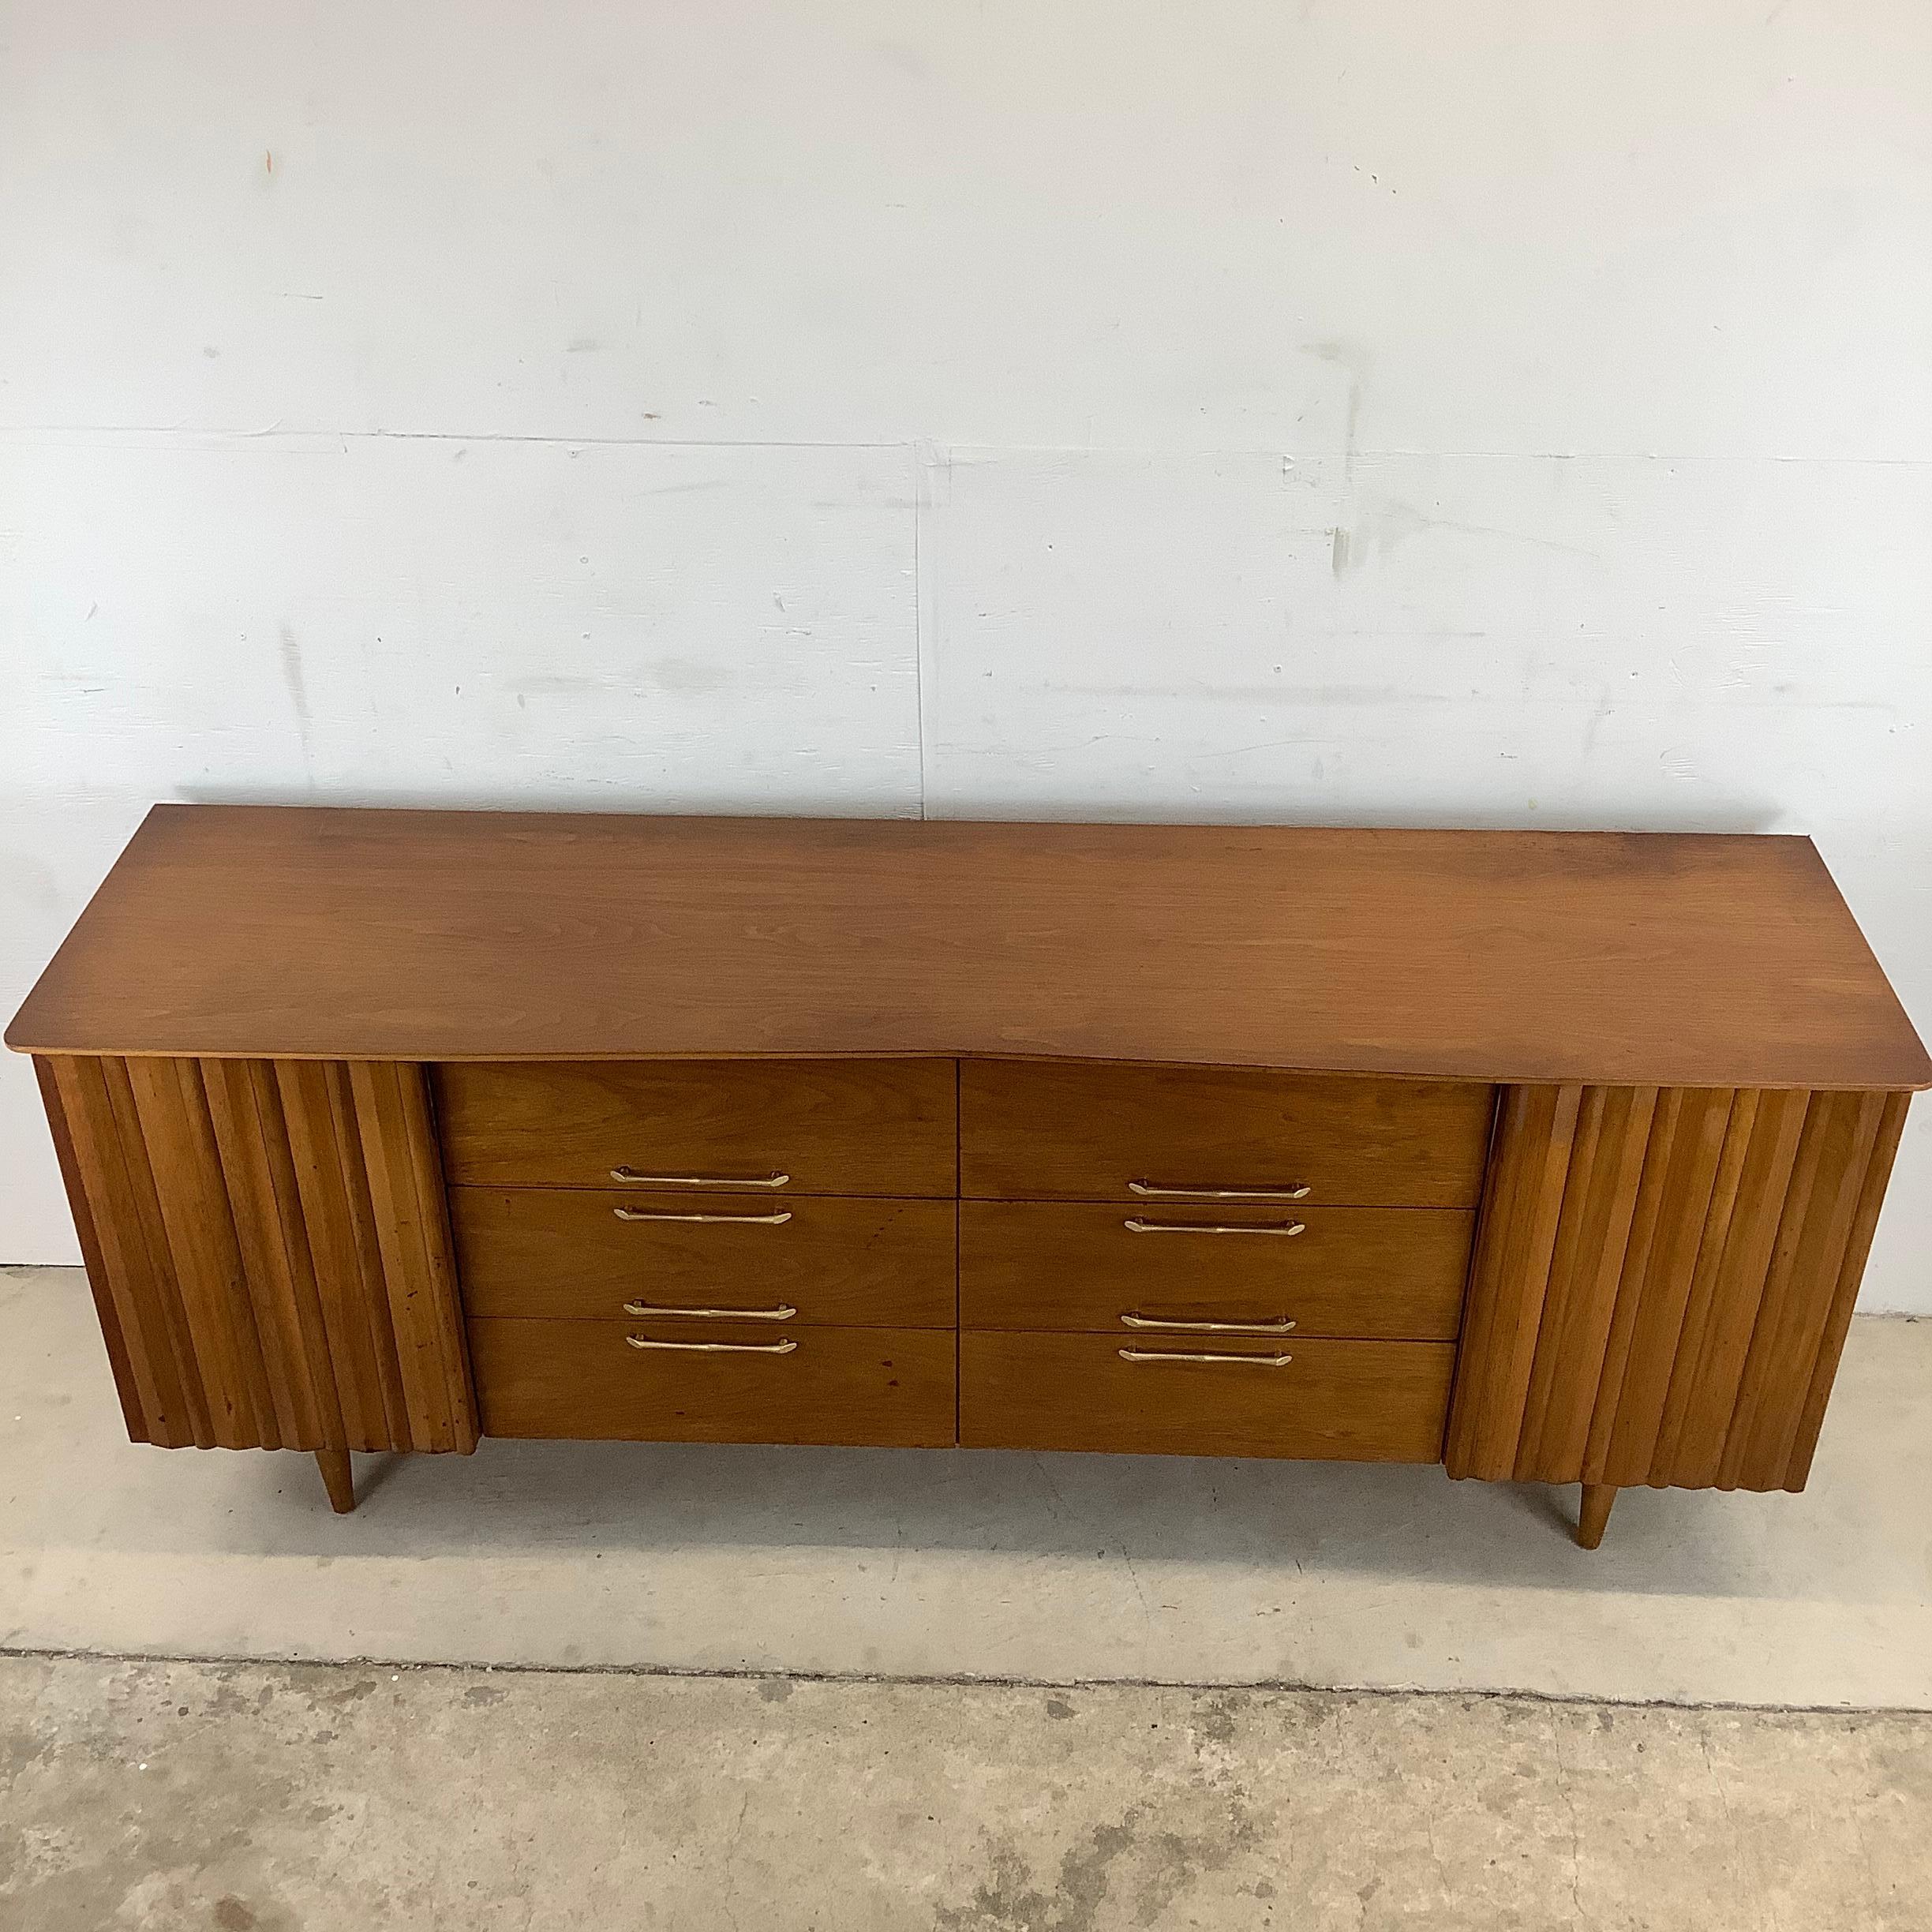 This impressive midcentury bedroom dresser features twelve spacious drawers in a unique danish modern design. The matched vintage wood grain finish and 1960s style make this long dresser an eye-catching centerpiece to any bedroom setting. Original